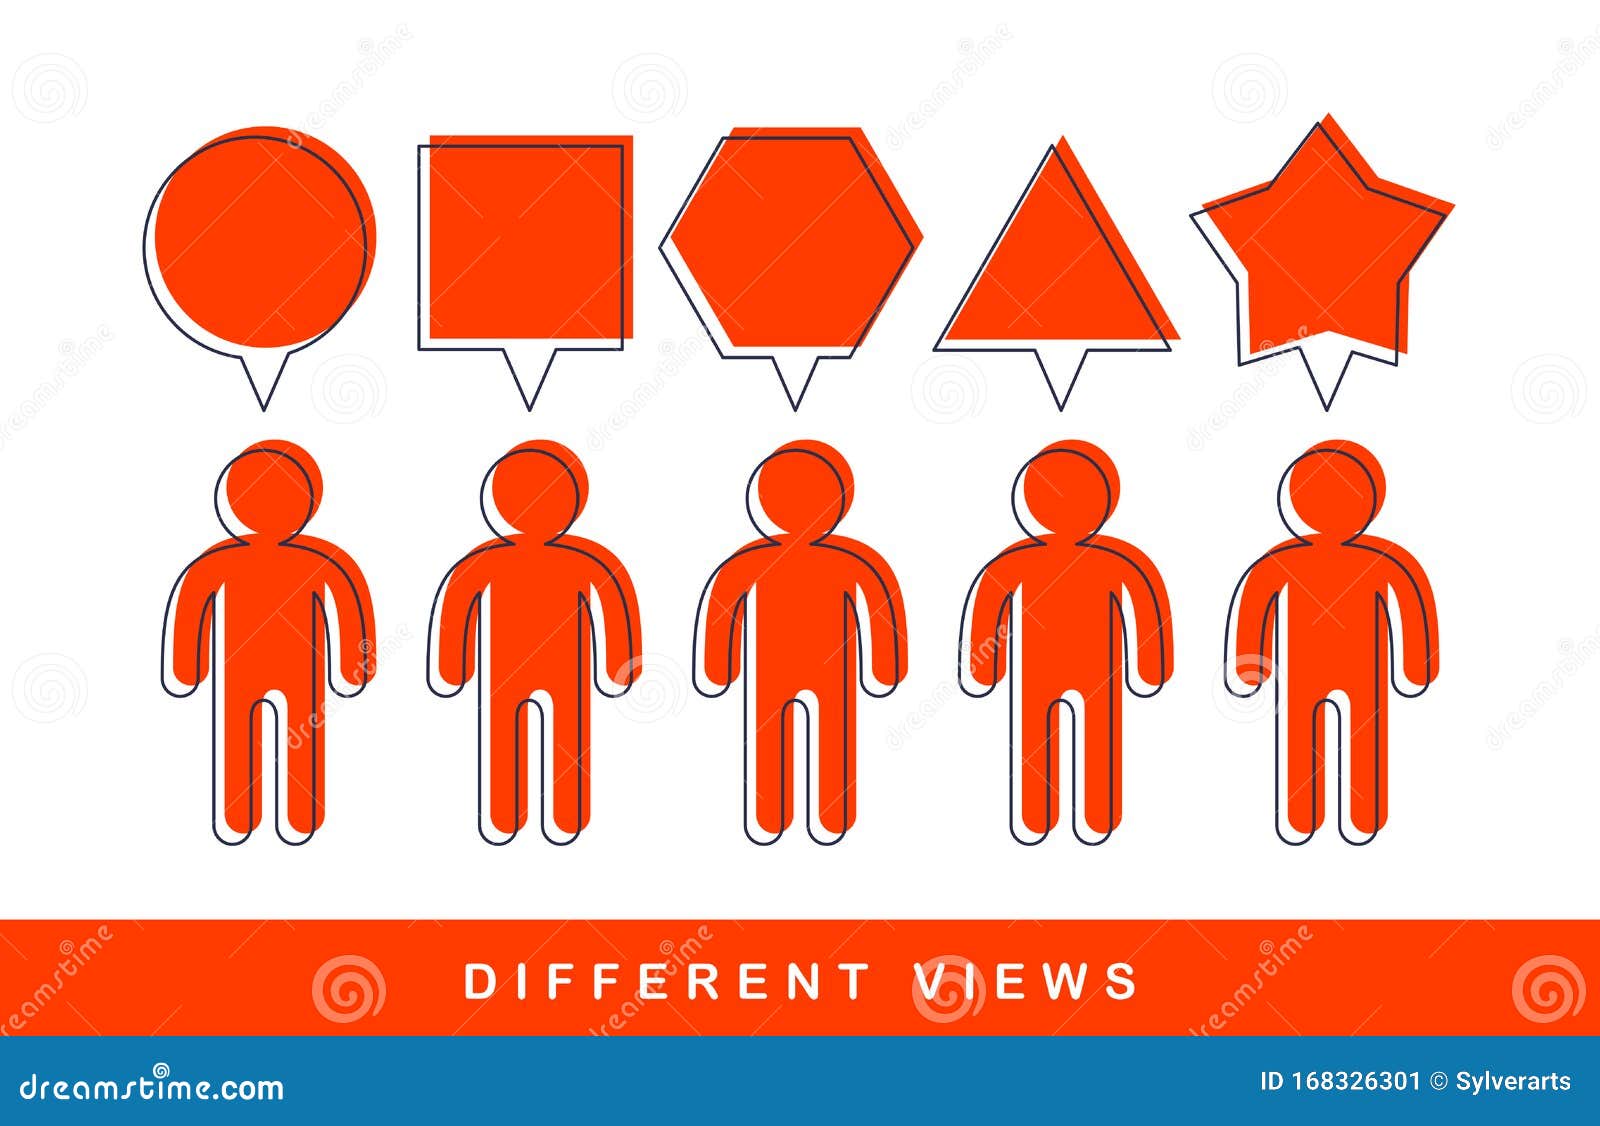 opinion diversity  concept, different perspectives metaphor.